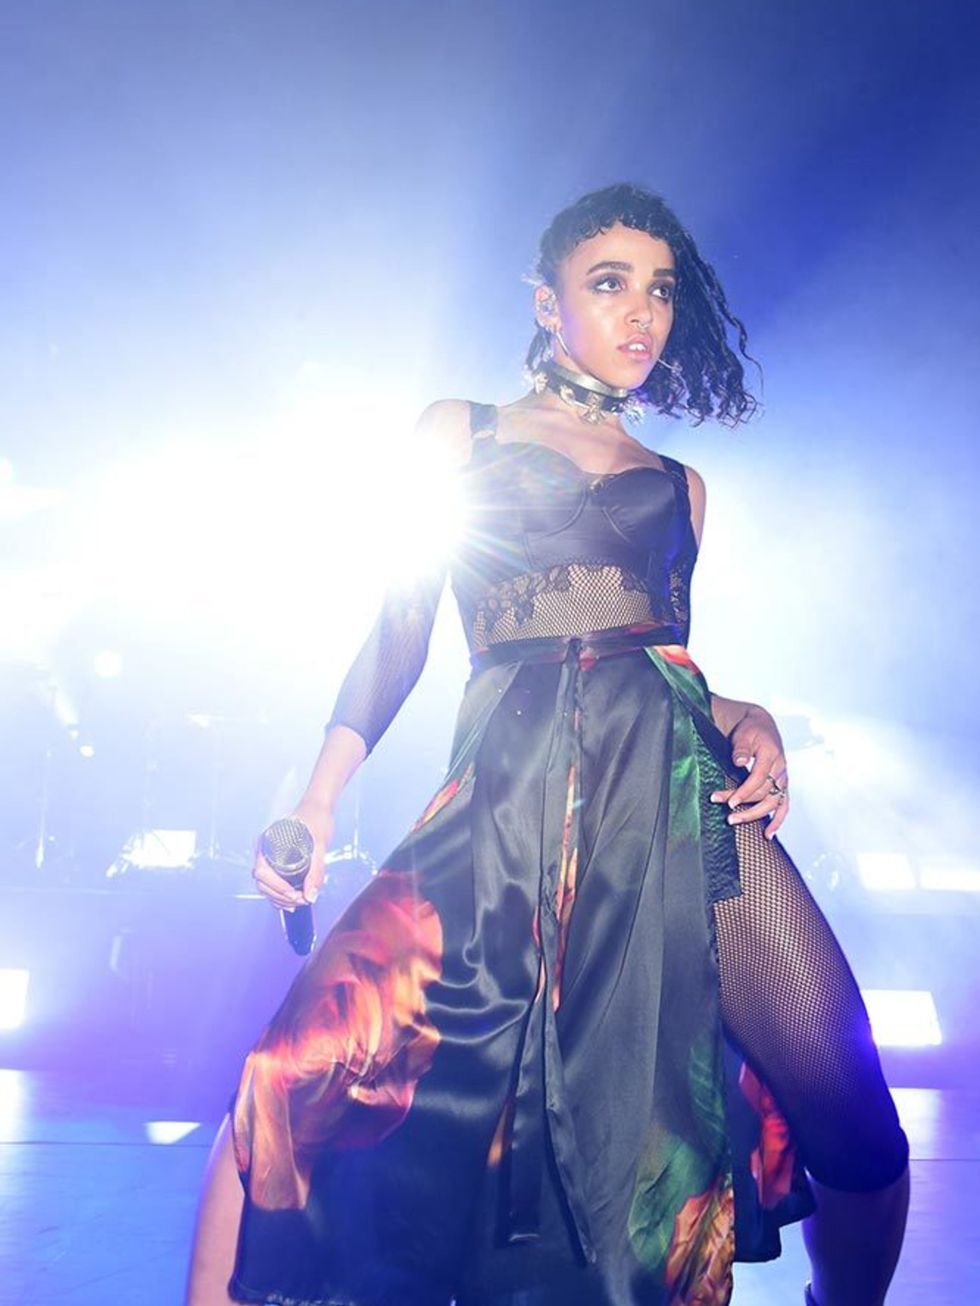 FKA Twigs performing at the MAC party during London Fashion Week, September 2015.